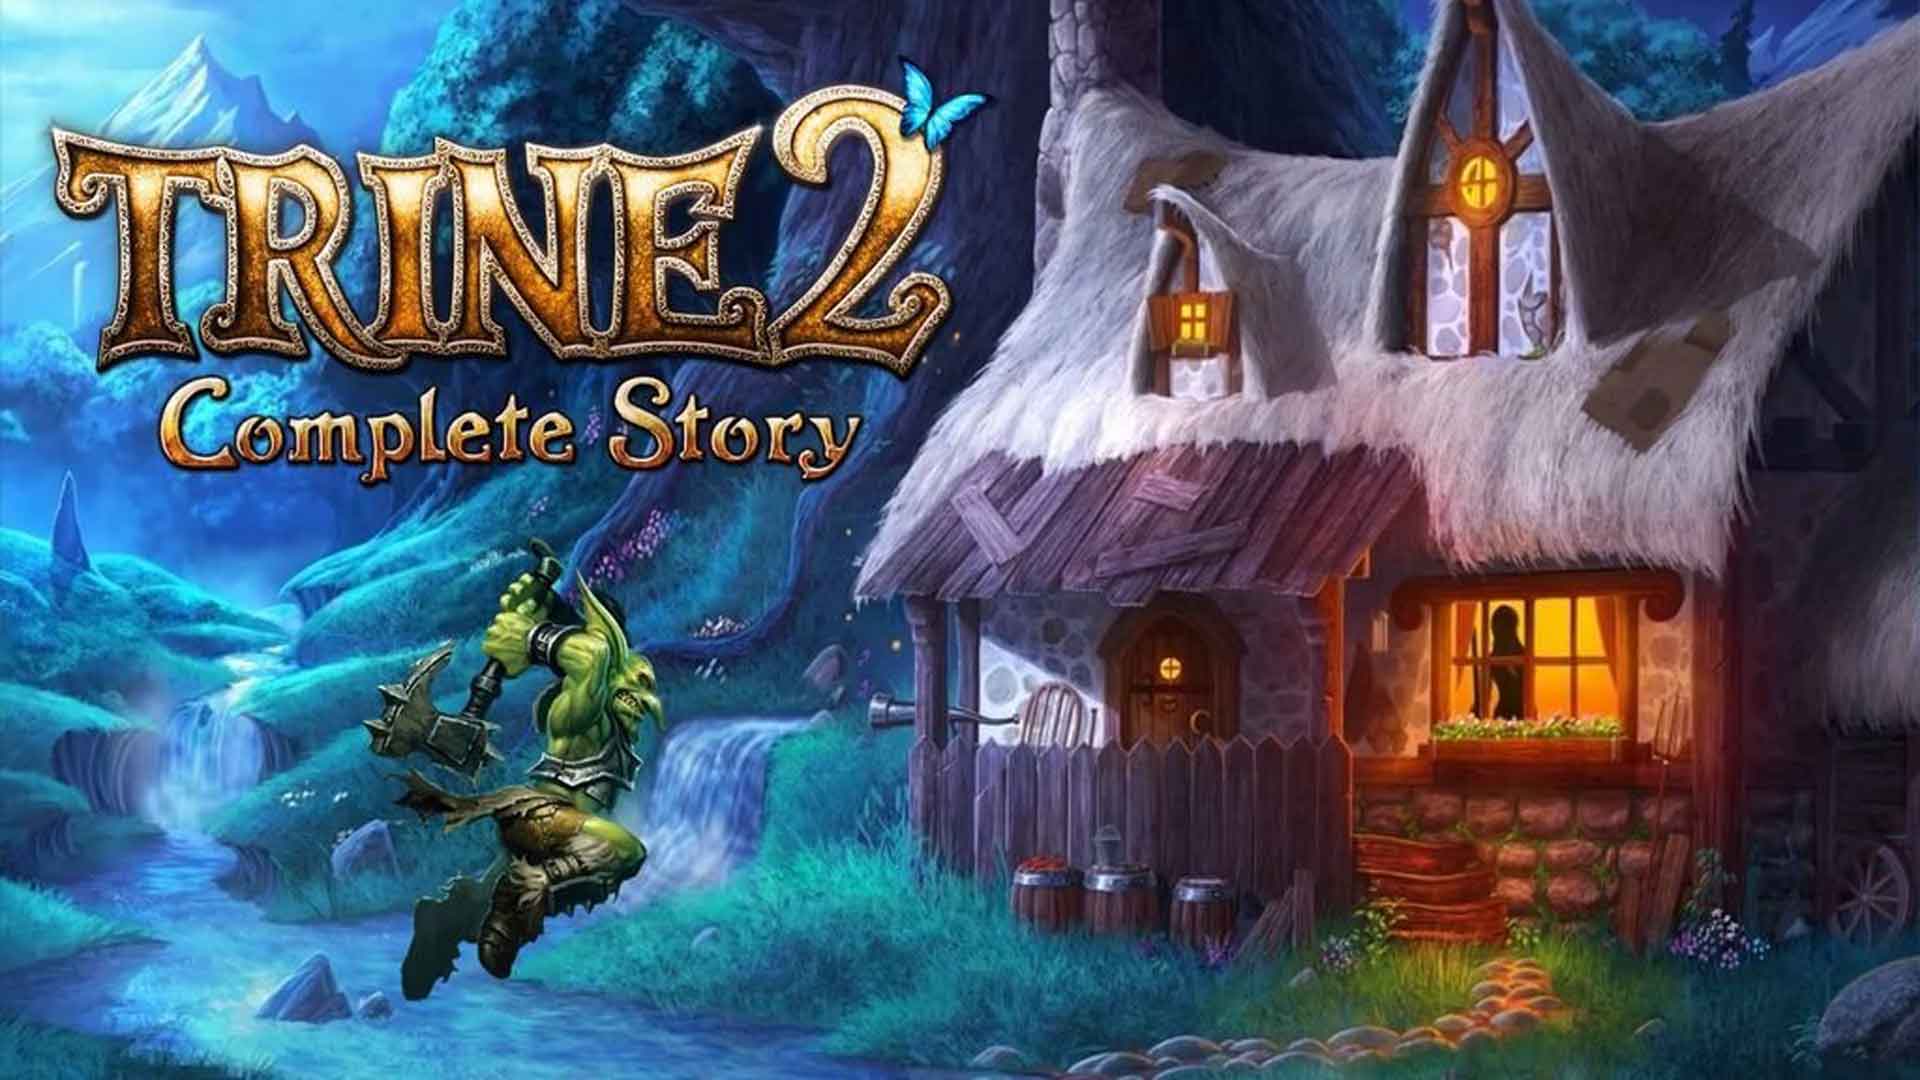 trine 2 complete story wallpaper